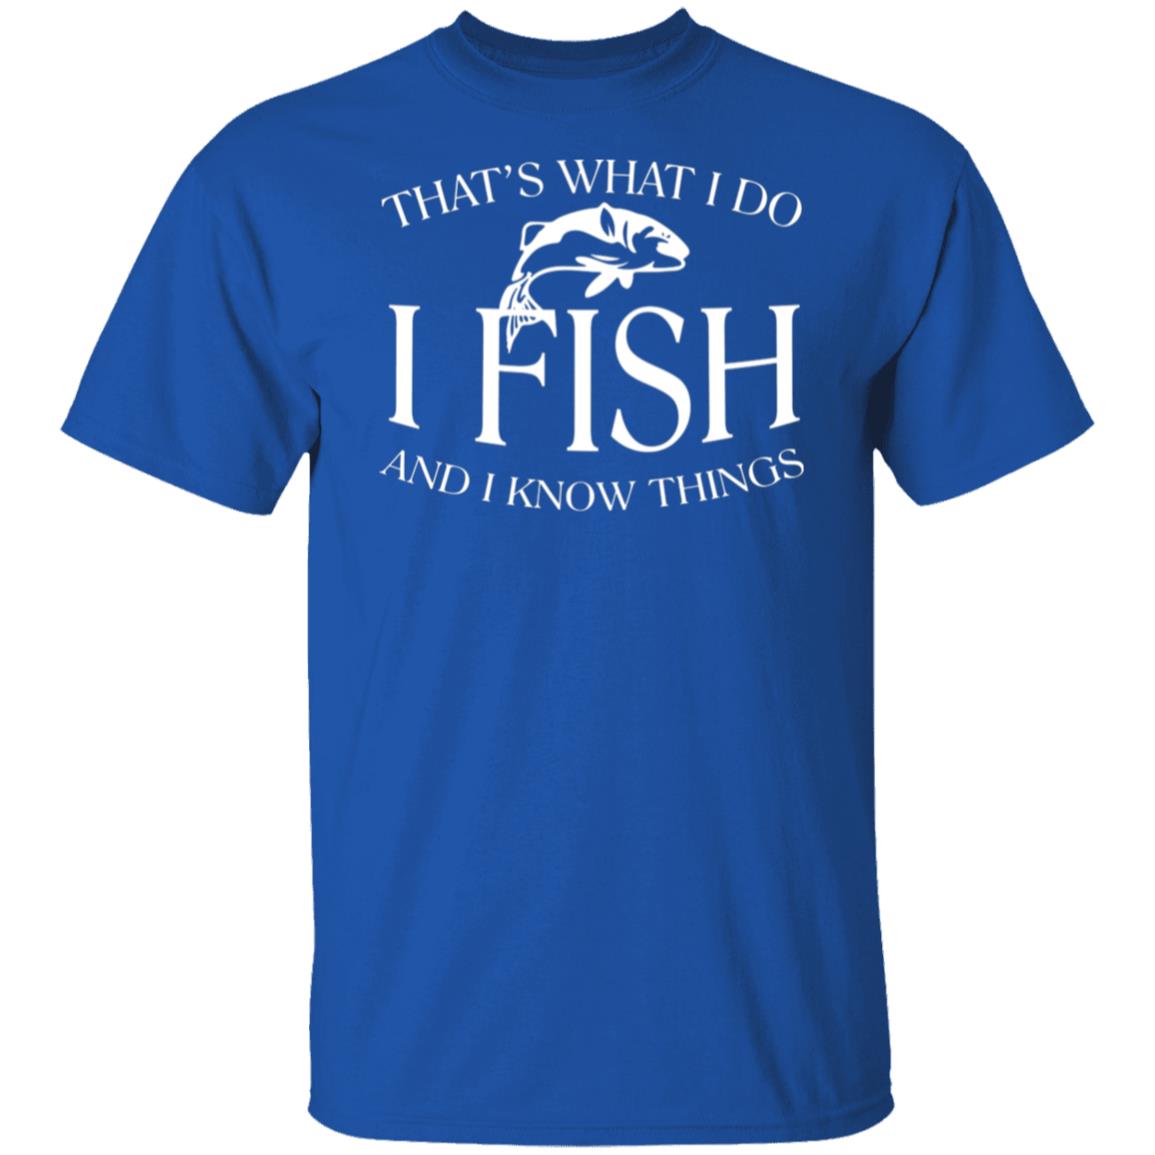 That's what I do I fish and I know things t-shirt royal